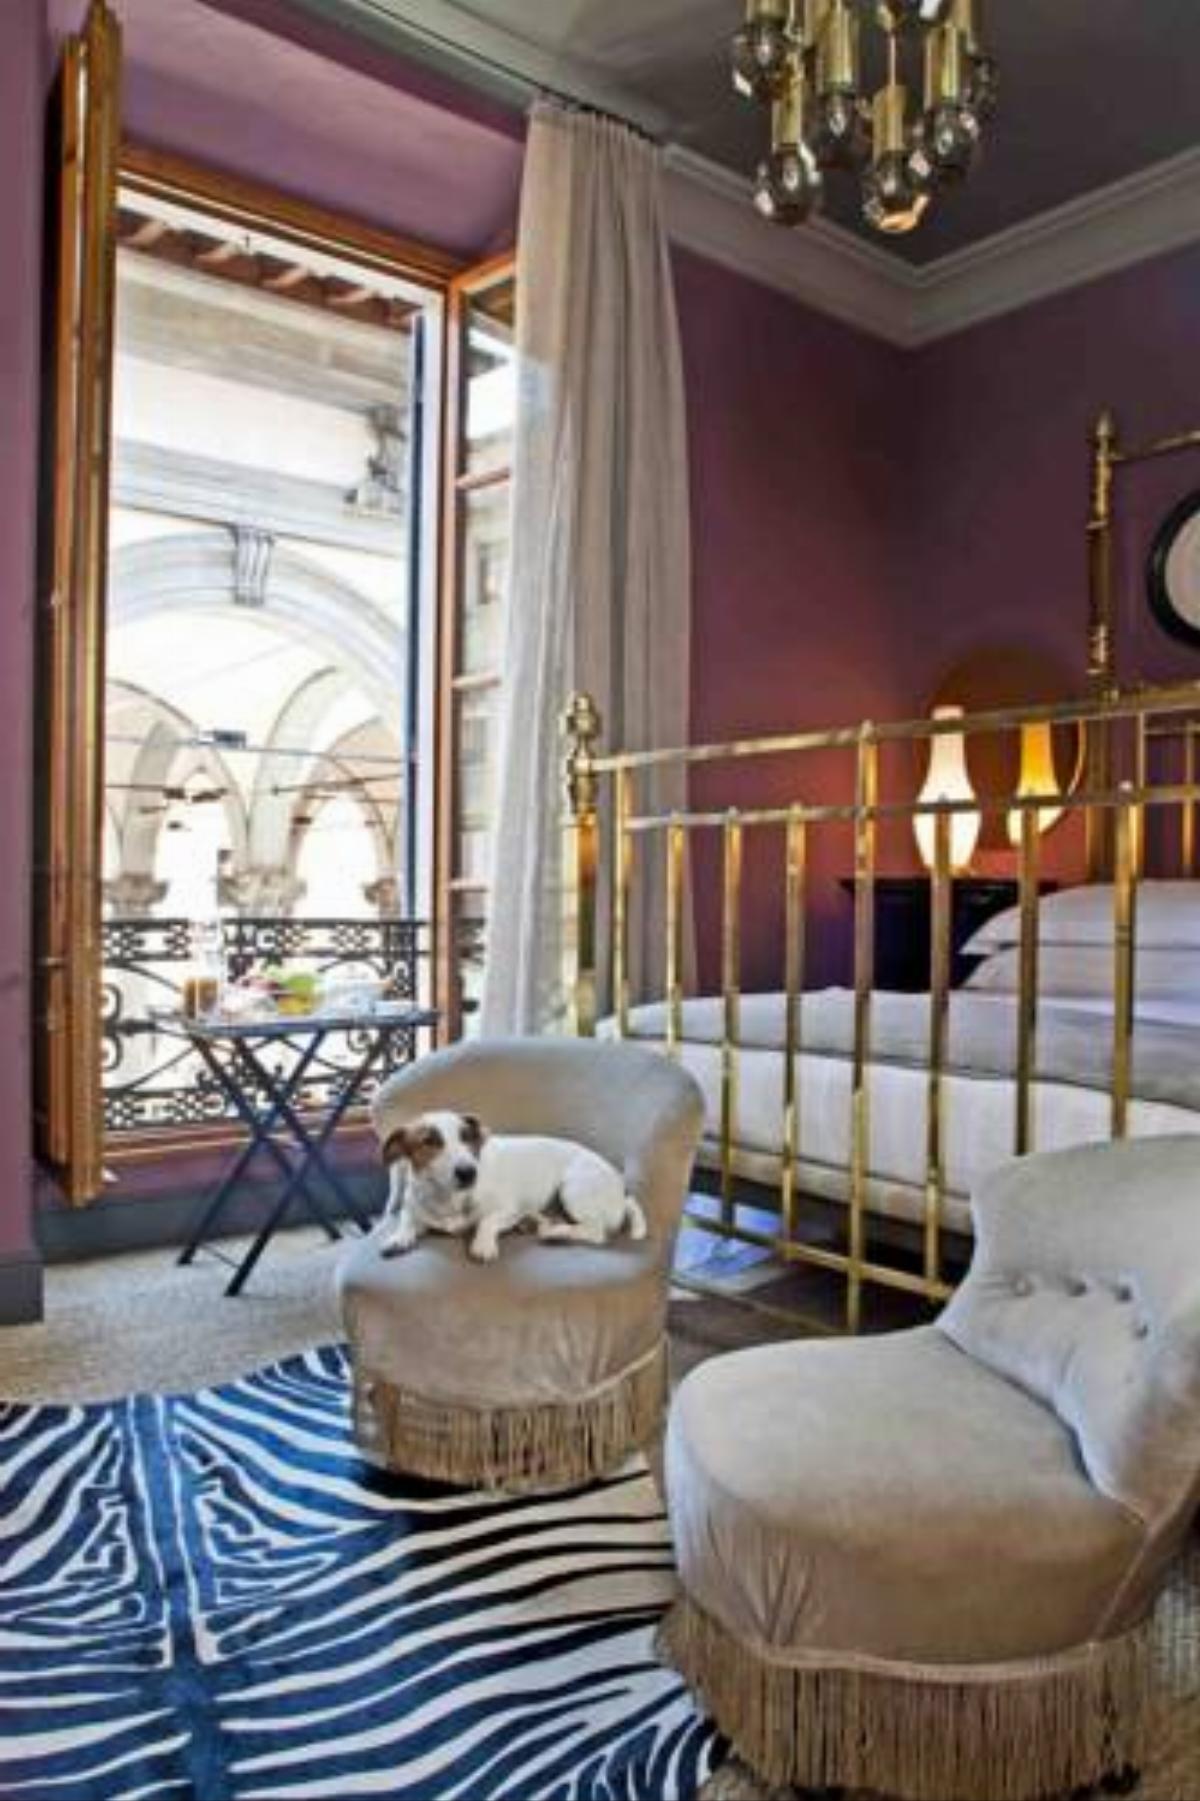 Porcellino Gallery - The Tuscan Collection Hotel Florence Italy